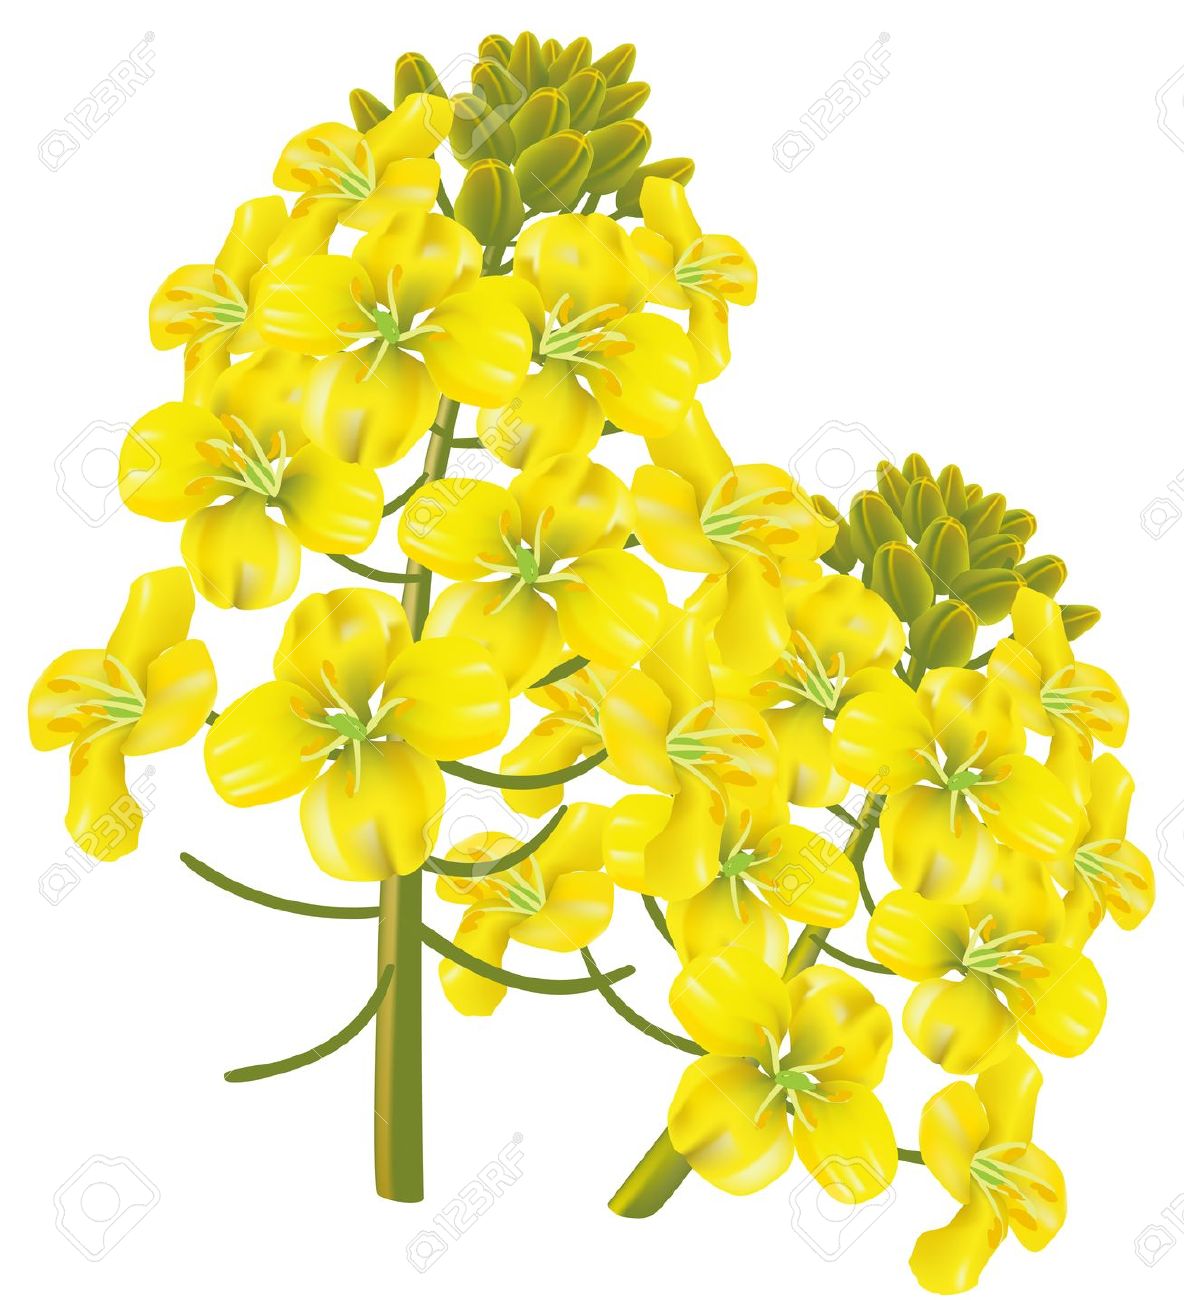 Canola clipart #15, Download drawings